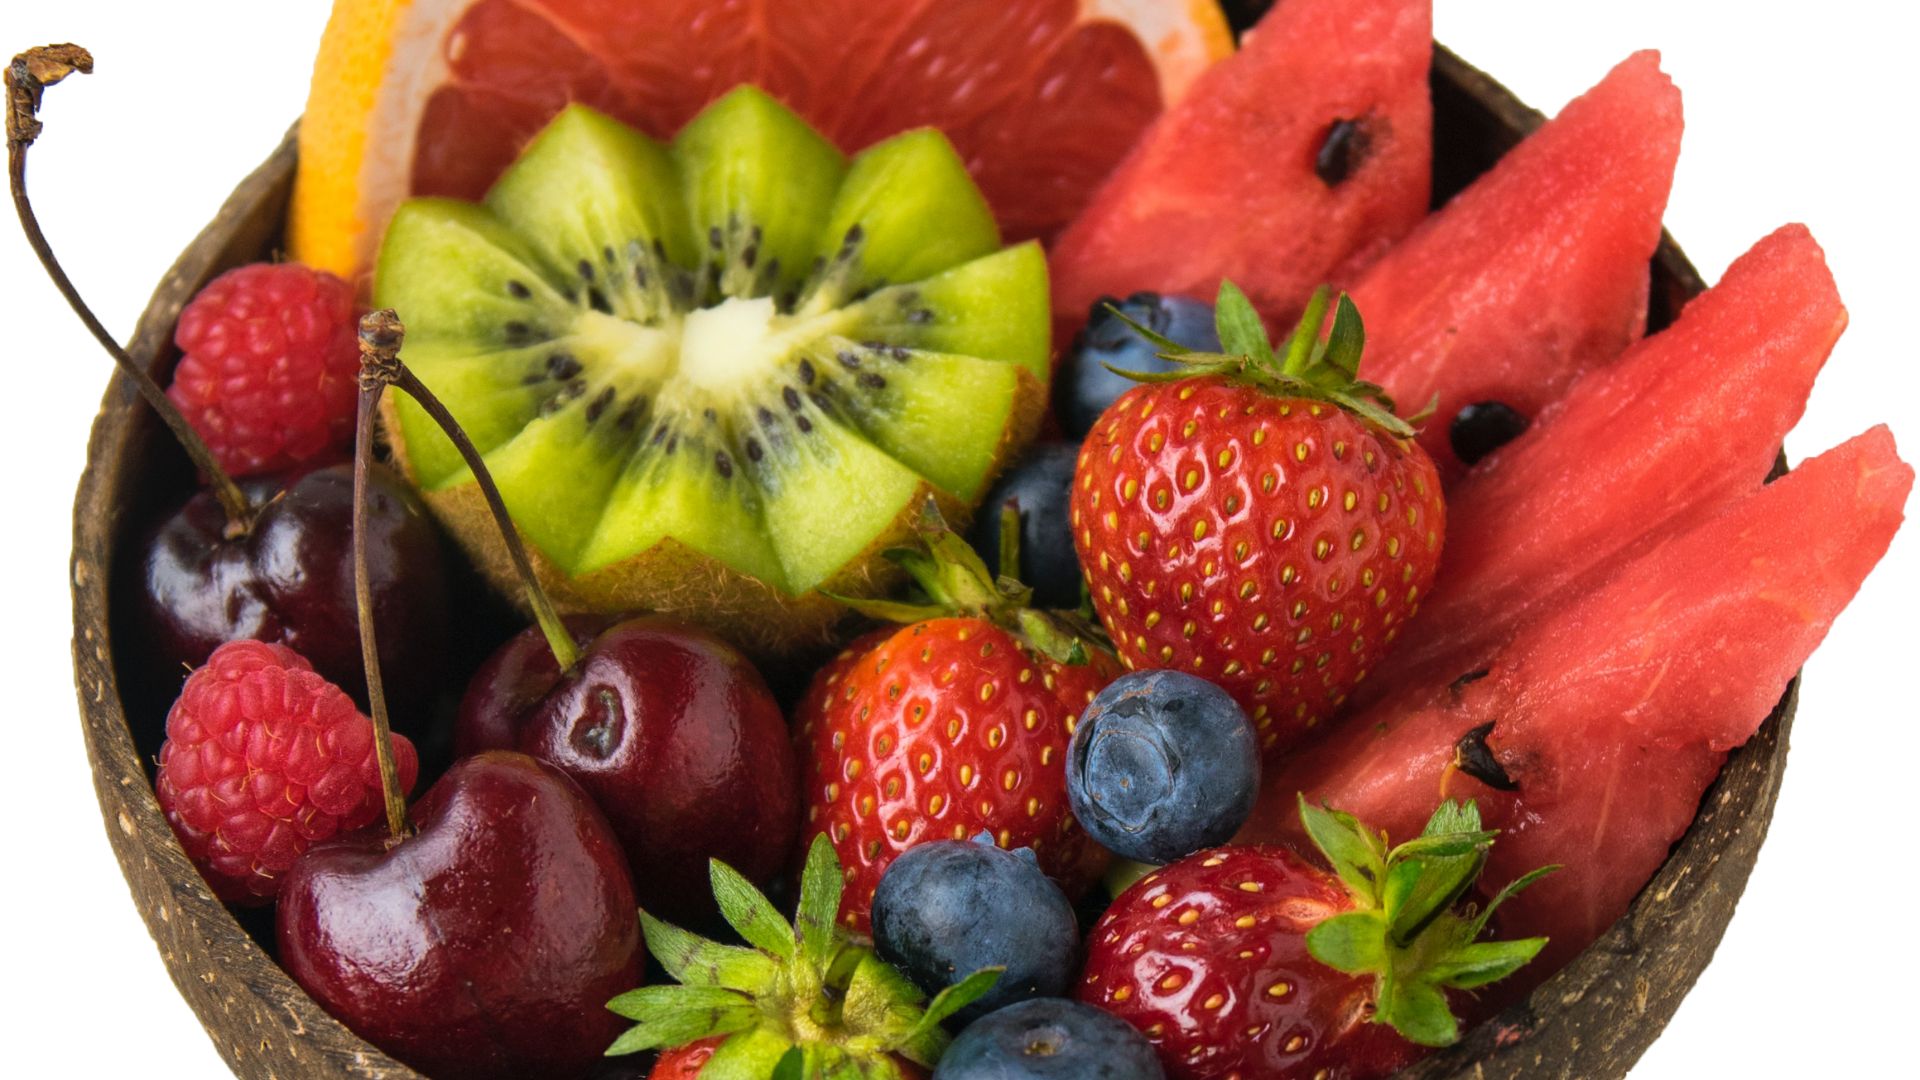 Eating more fruit can work on mental health says study